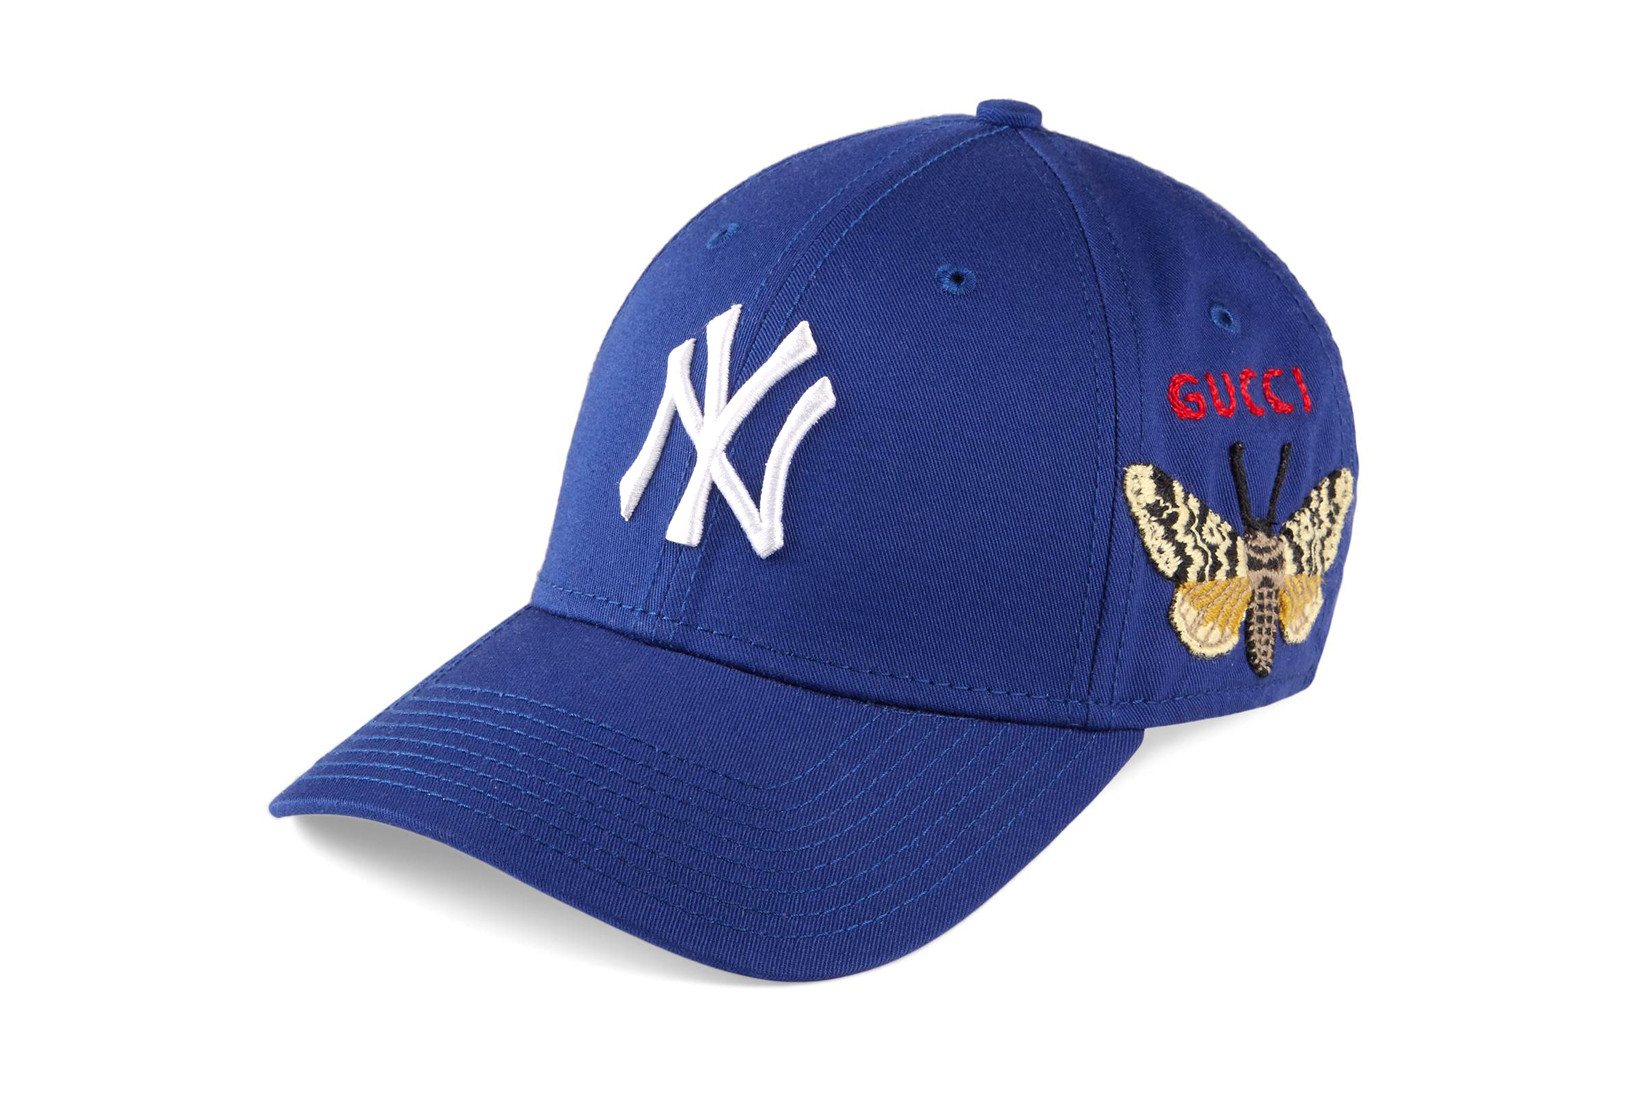 Gucci Wins Again With This New York Yankees Pre-Fall Accessories